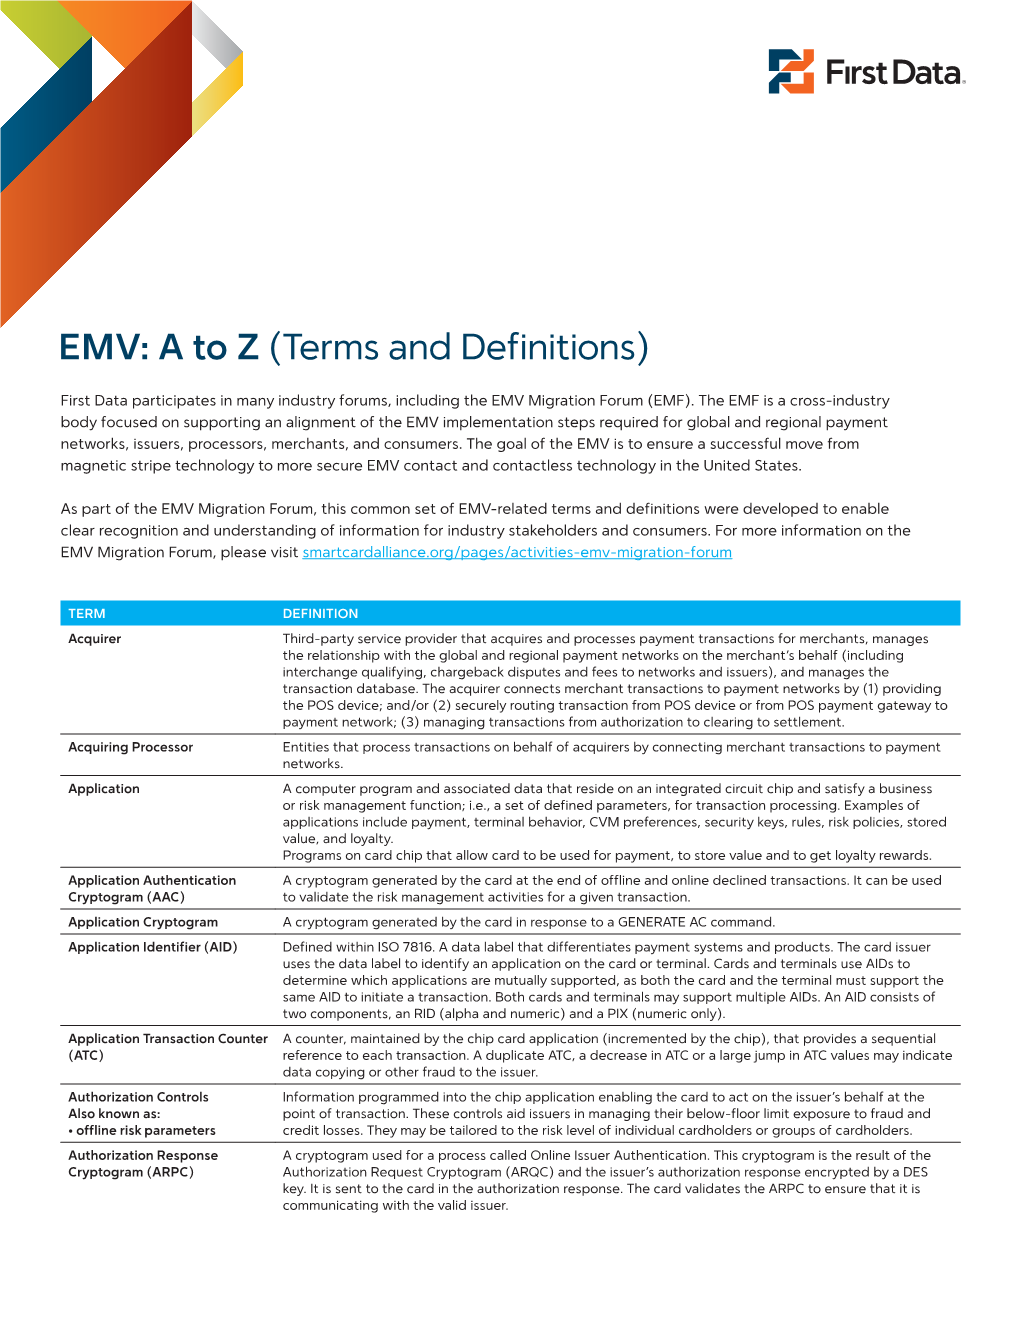 EMV: a to Z (Terms and Definitions)